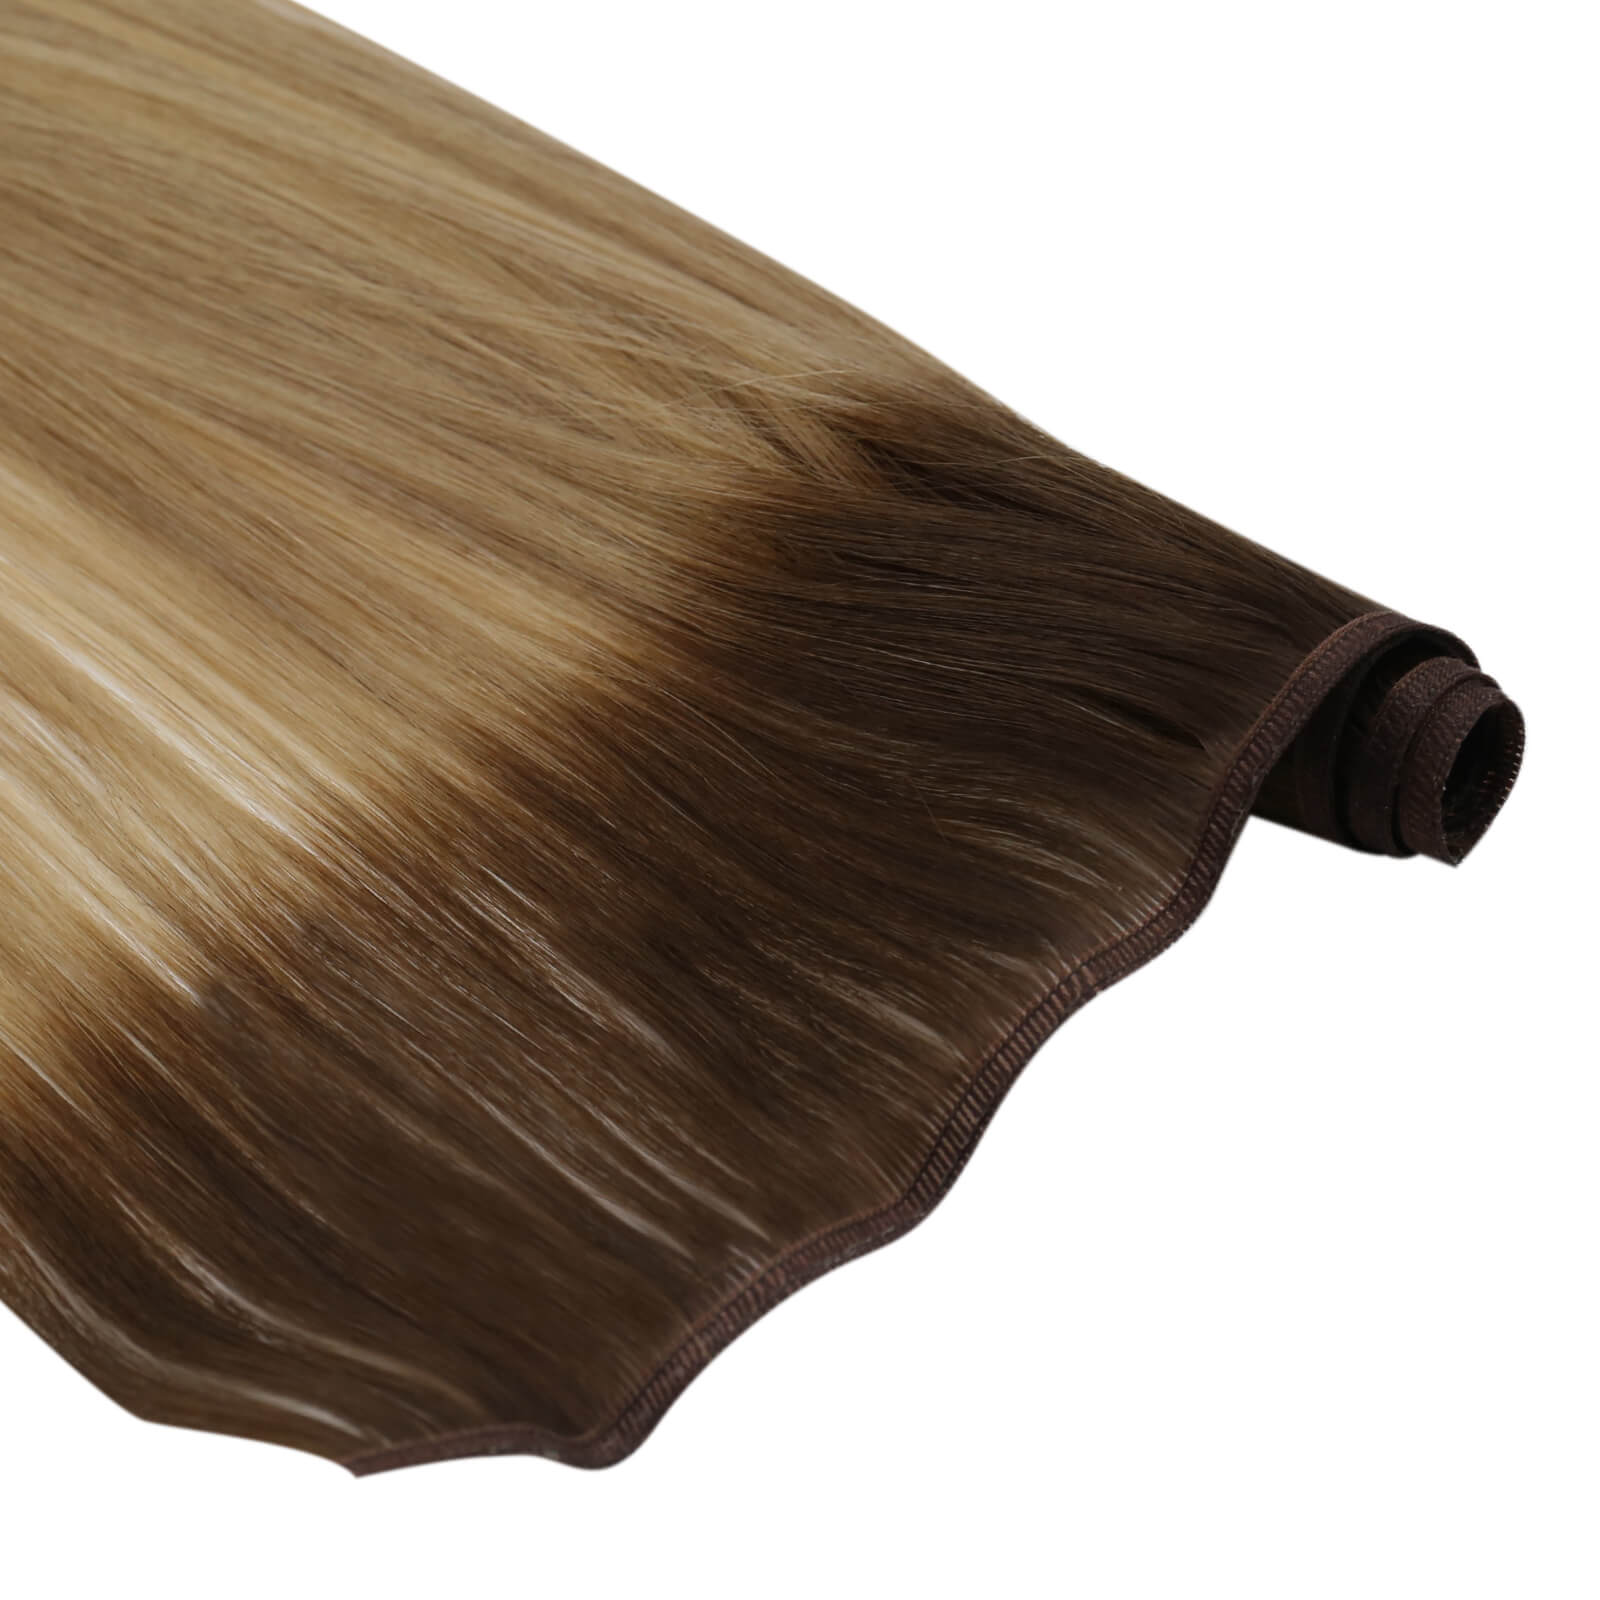 sunny hair sew in weft hair extensions human hair,sunny hair flat weft extensions,100% real human hair 